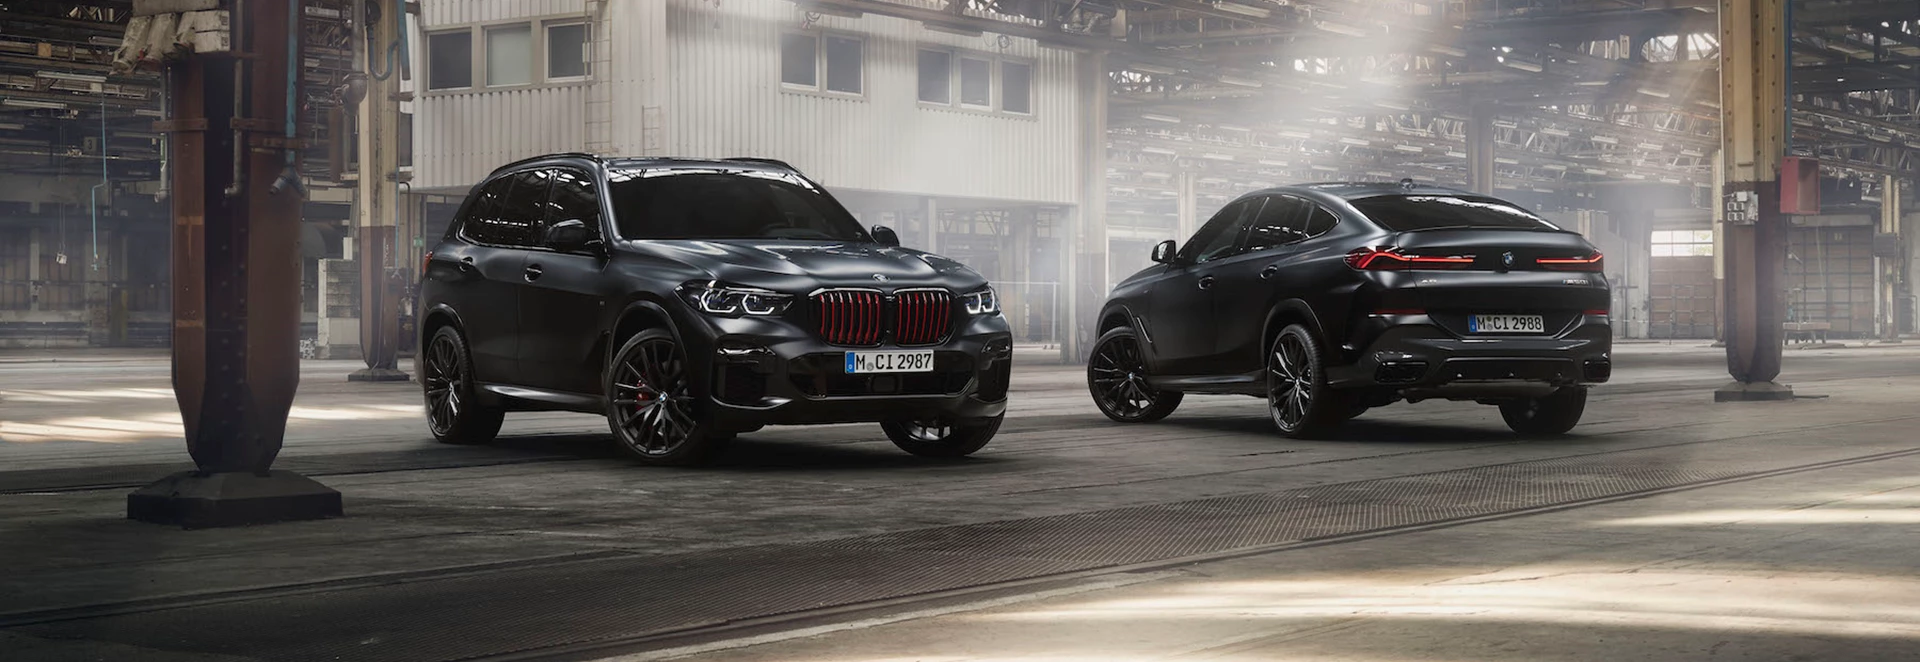 BMW introduces range of new special-edition SUVs 